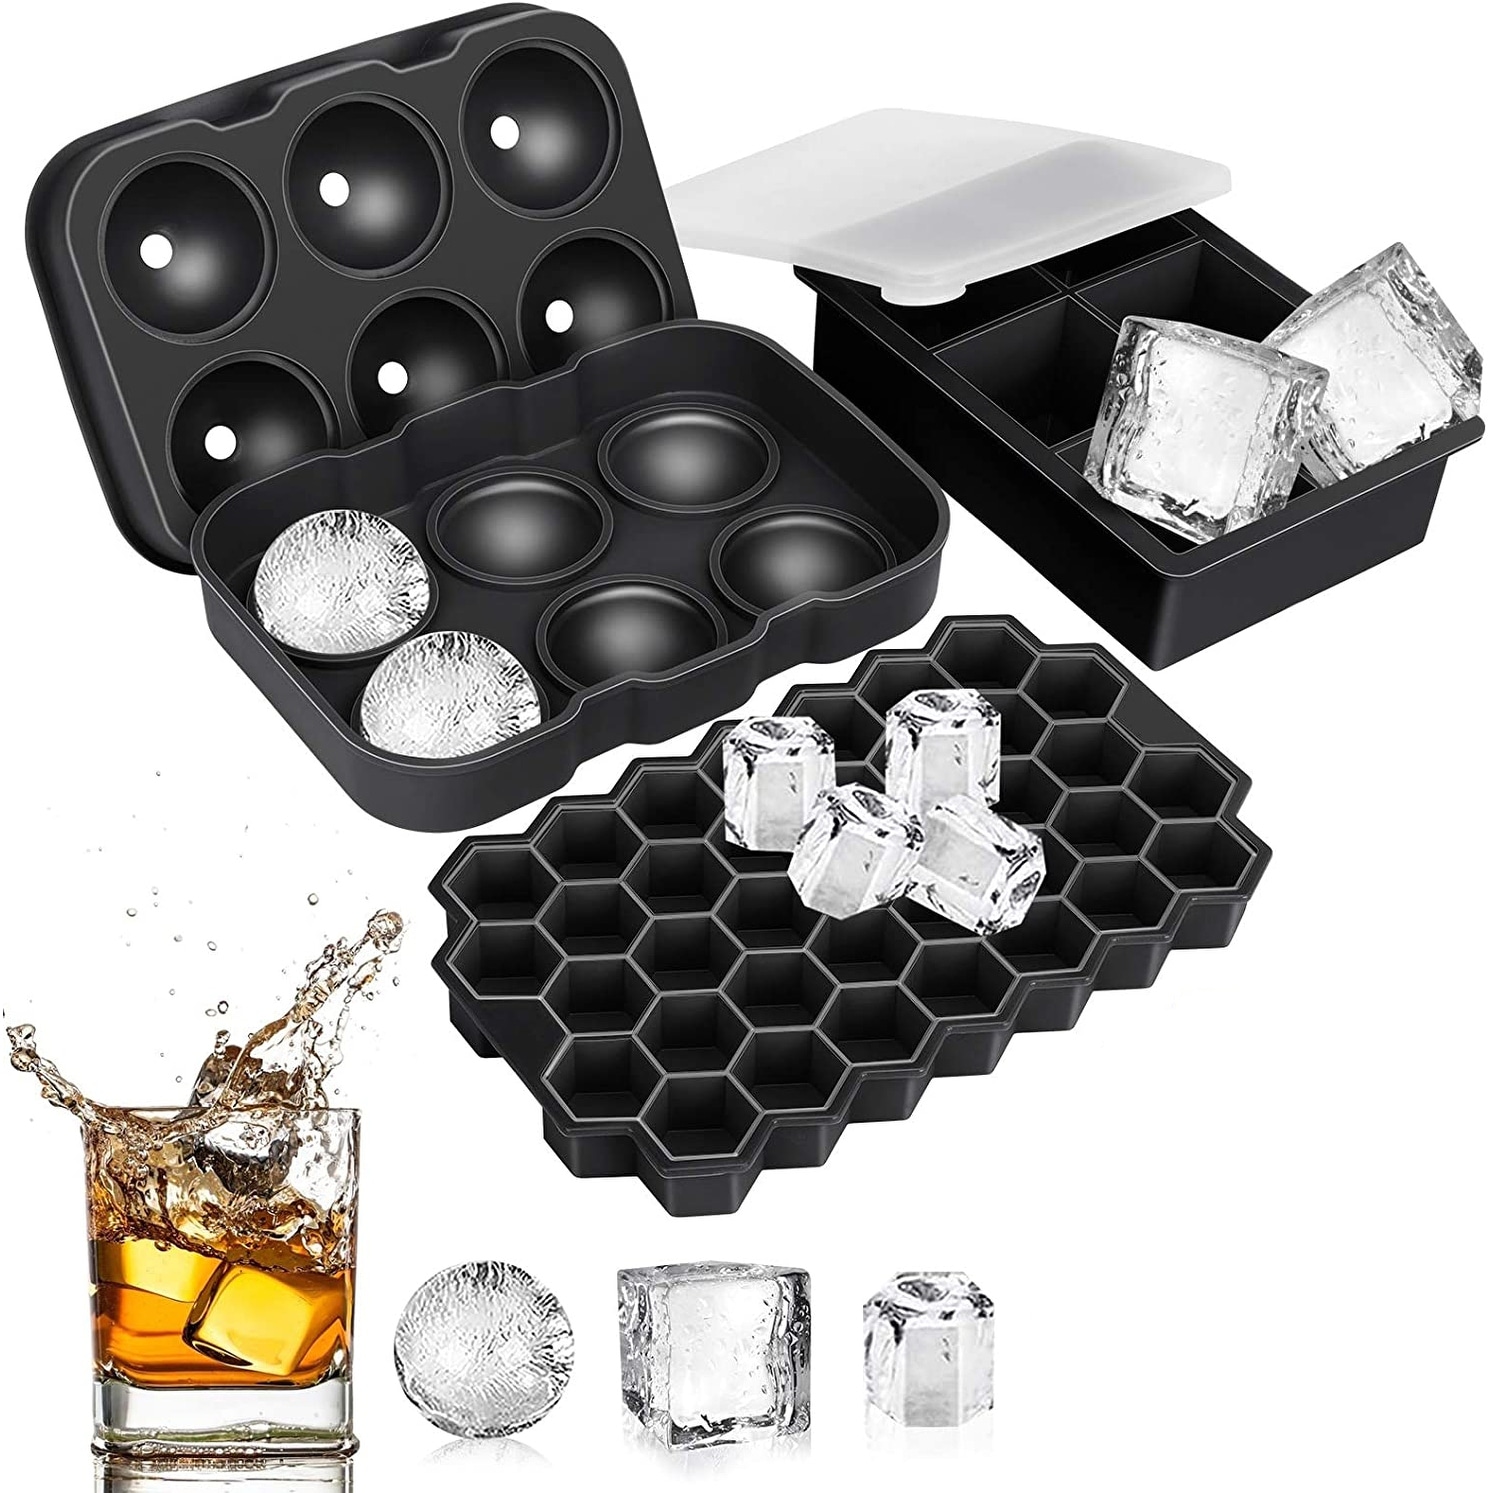 https://ak1.ostkcdn.com/images/products/is/images/direct/ddd1cb5fef2e75bac258a1be7e0416a2631f3c60/Ice-Tray--3-Shapes%2C-Ball%2C-Square%2C-Honeycomb.jpg